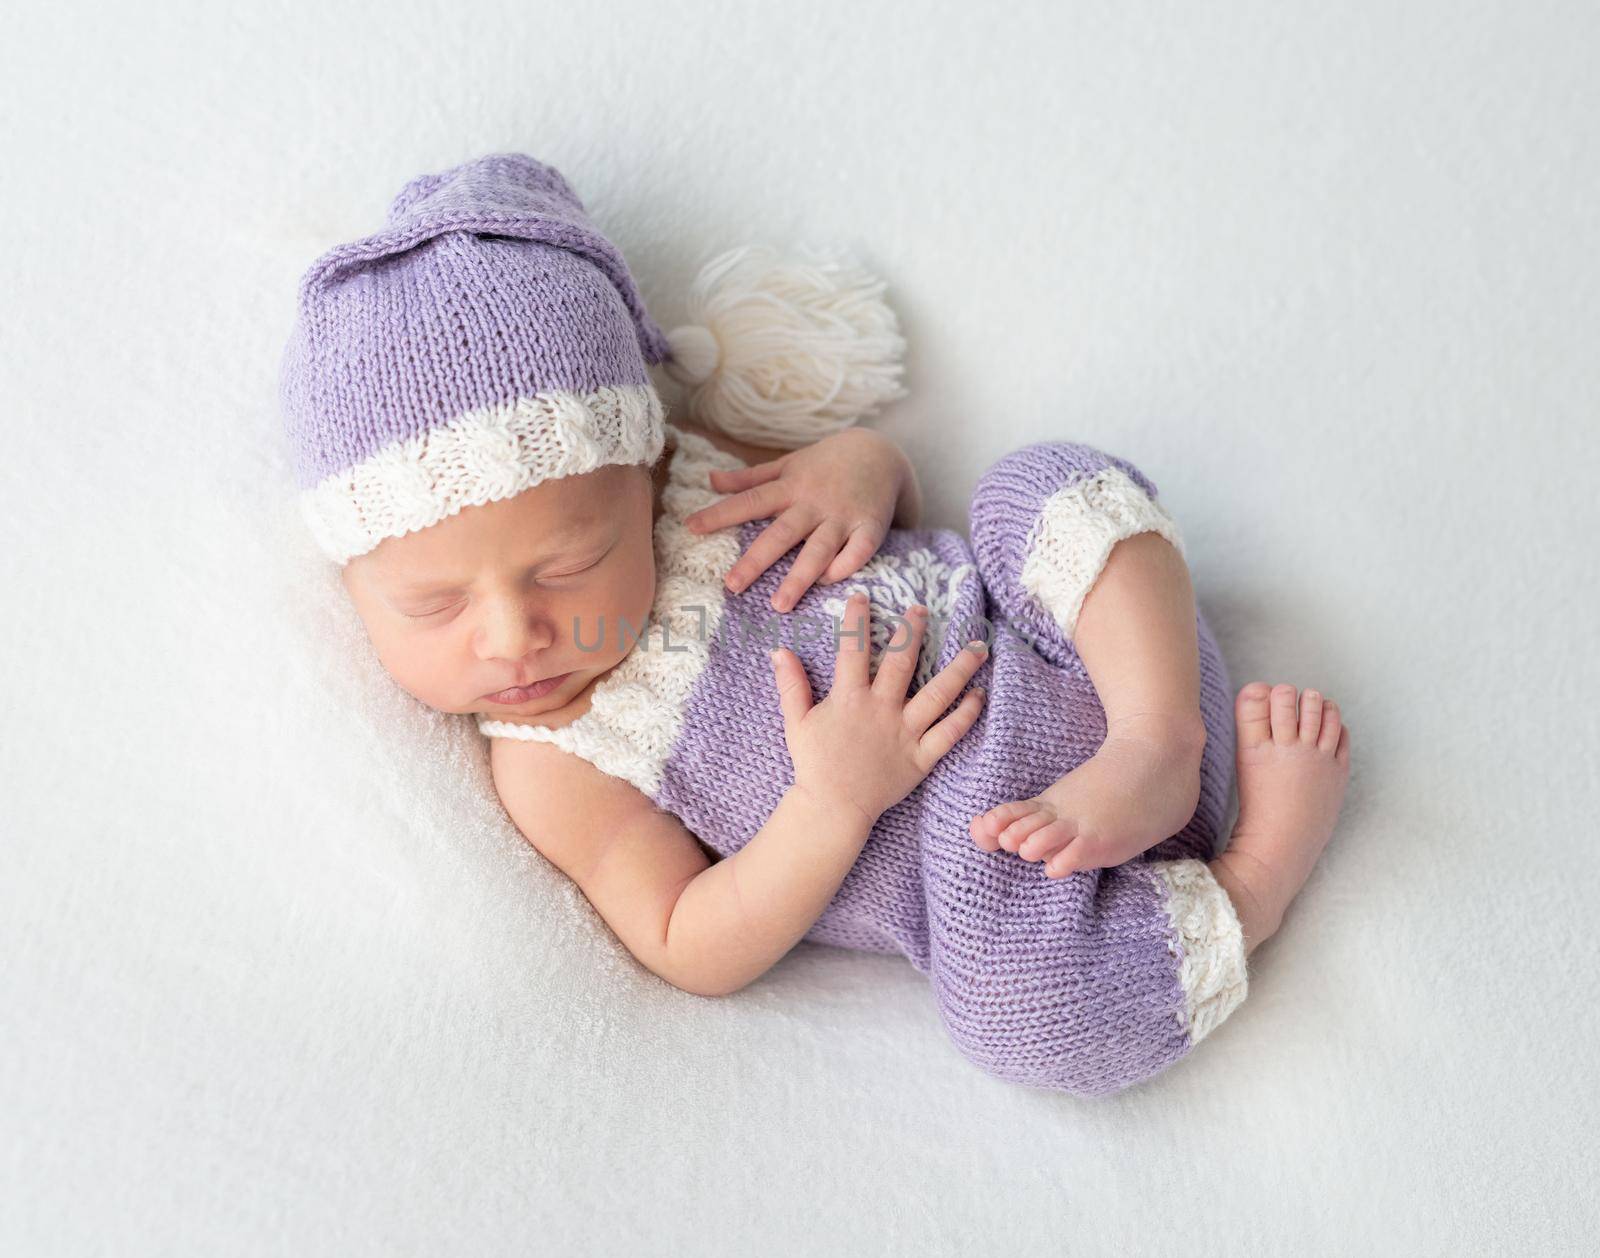 Cute little baby in white and purple knitted suit sweetly sleeping on white blanket